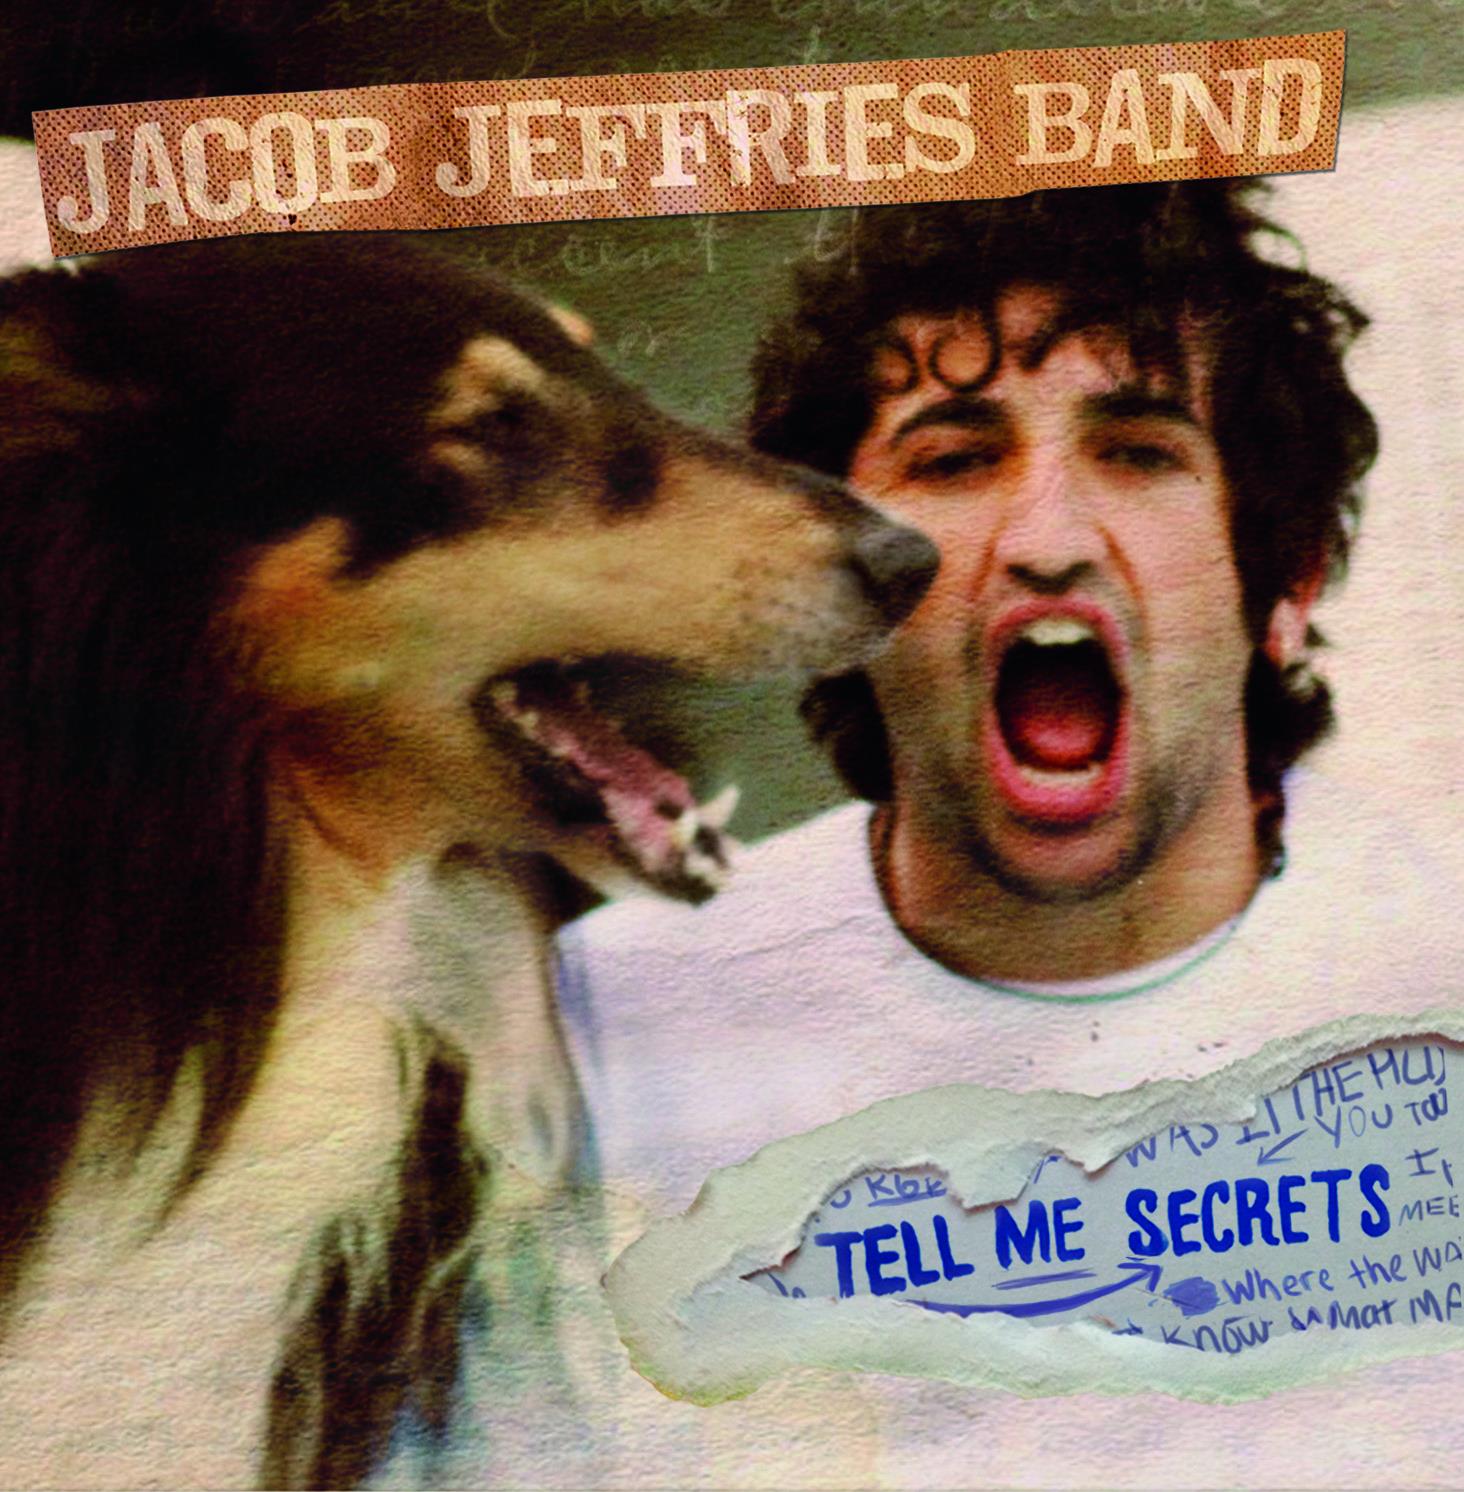 Jacob Jeffries Band | Tell Me Secrets | New Music Review